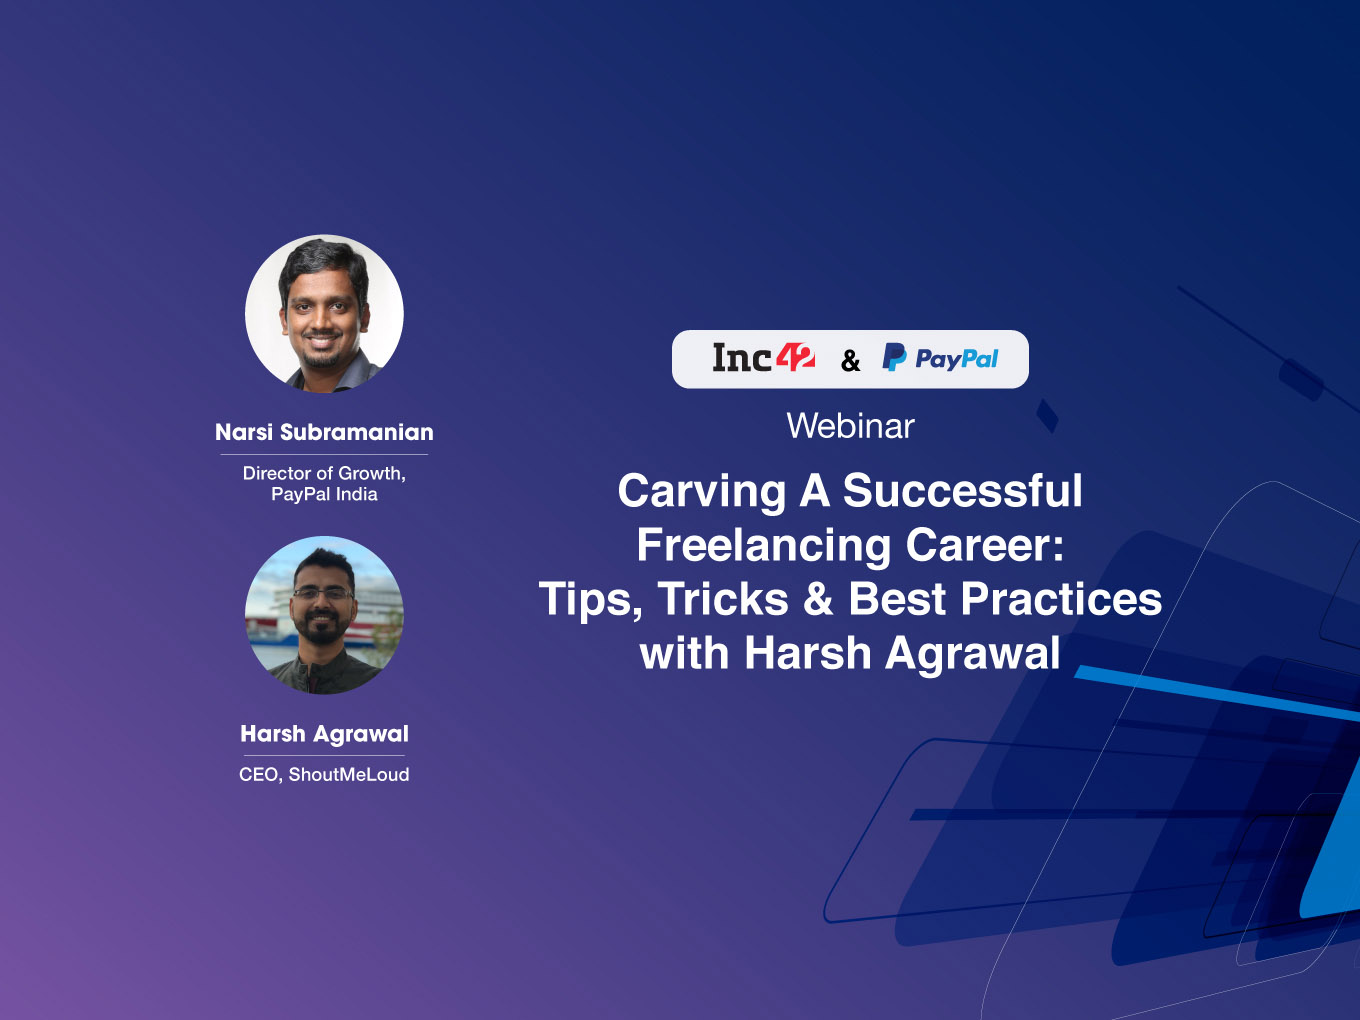 Carving A Successful Freelancing Career: Tips, Tricks & Best Practices with Harsh Agrawal—Inc42’s Latest Webinar